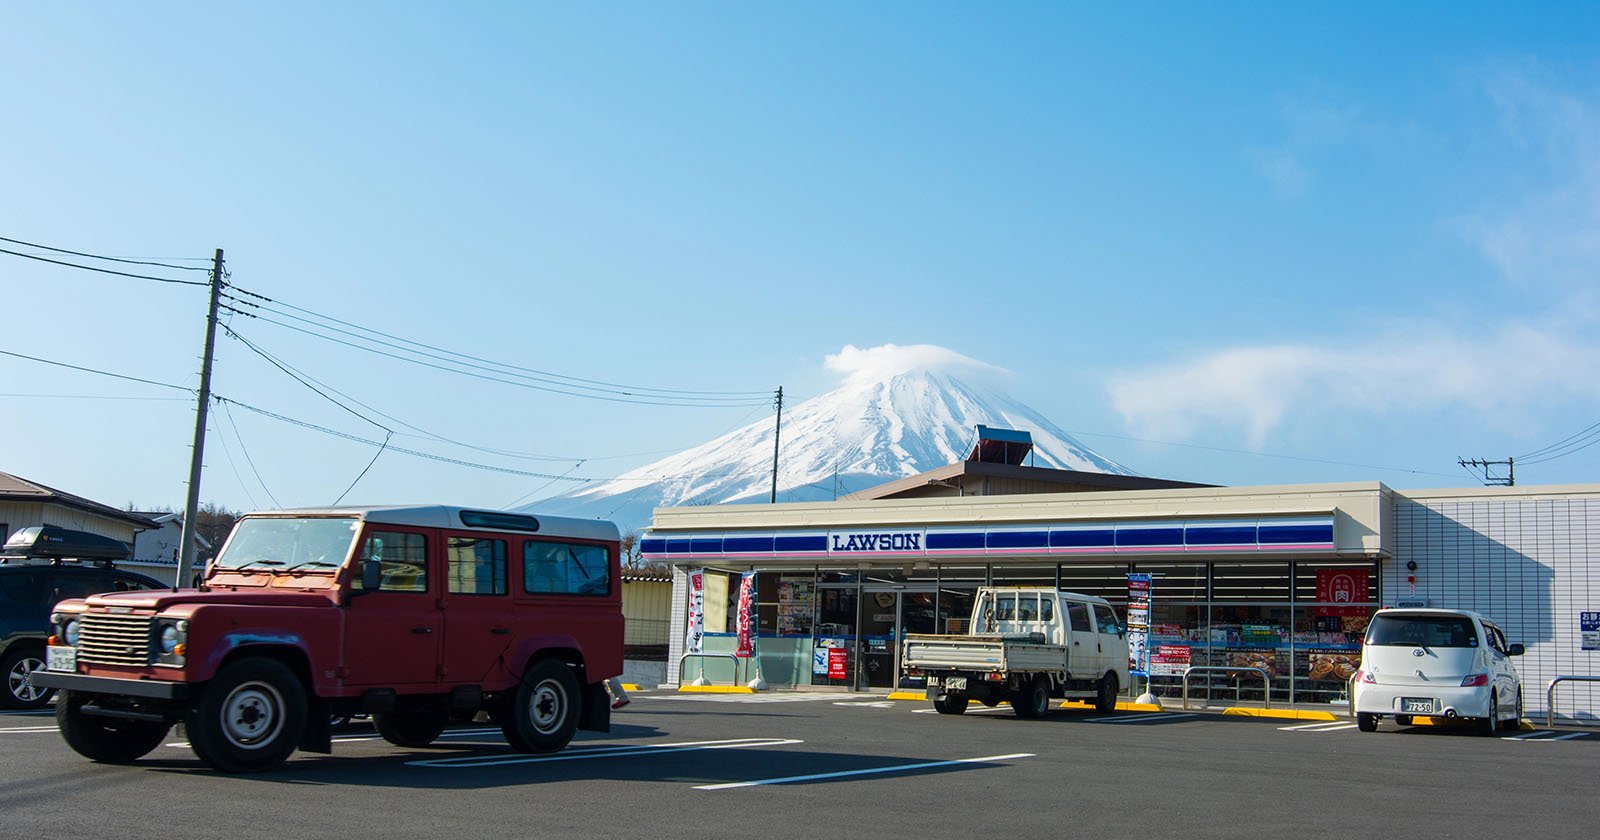  town make fuji view worse because misbehaving tourists 